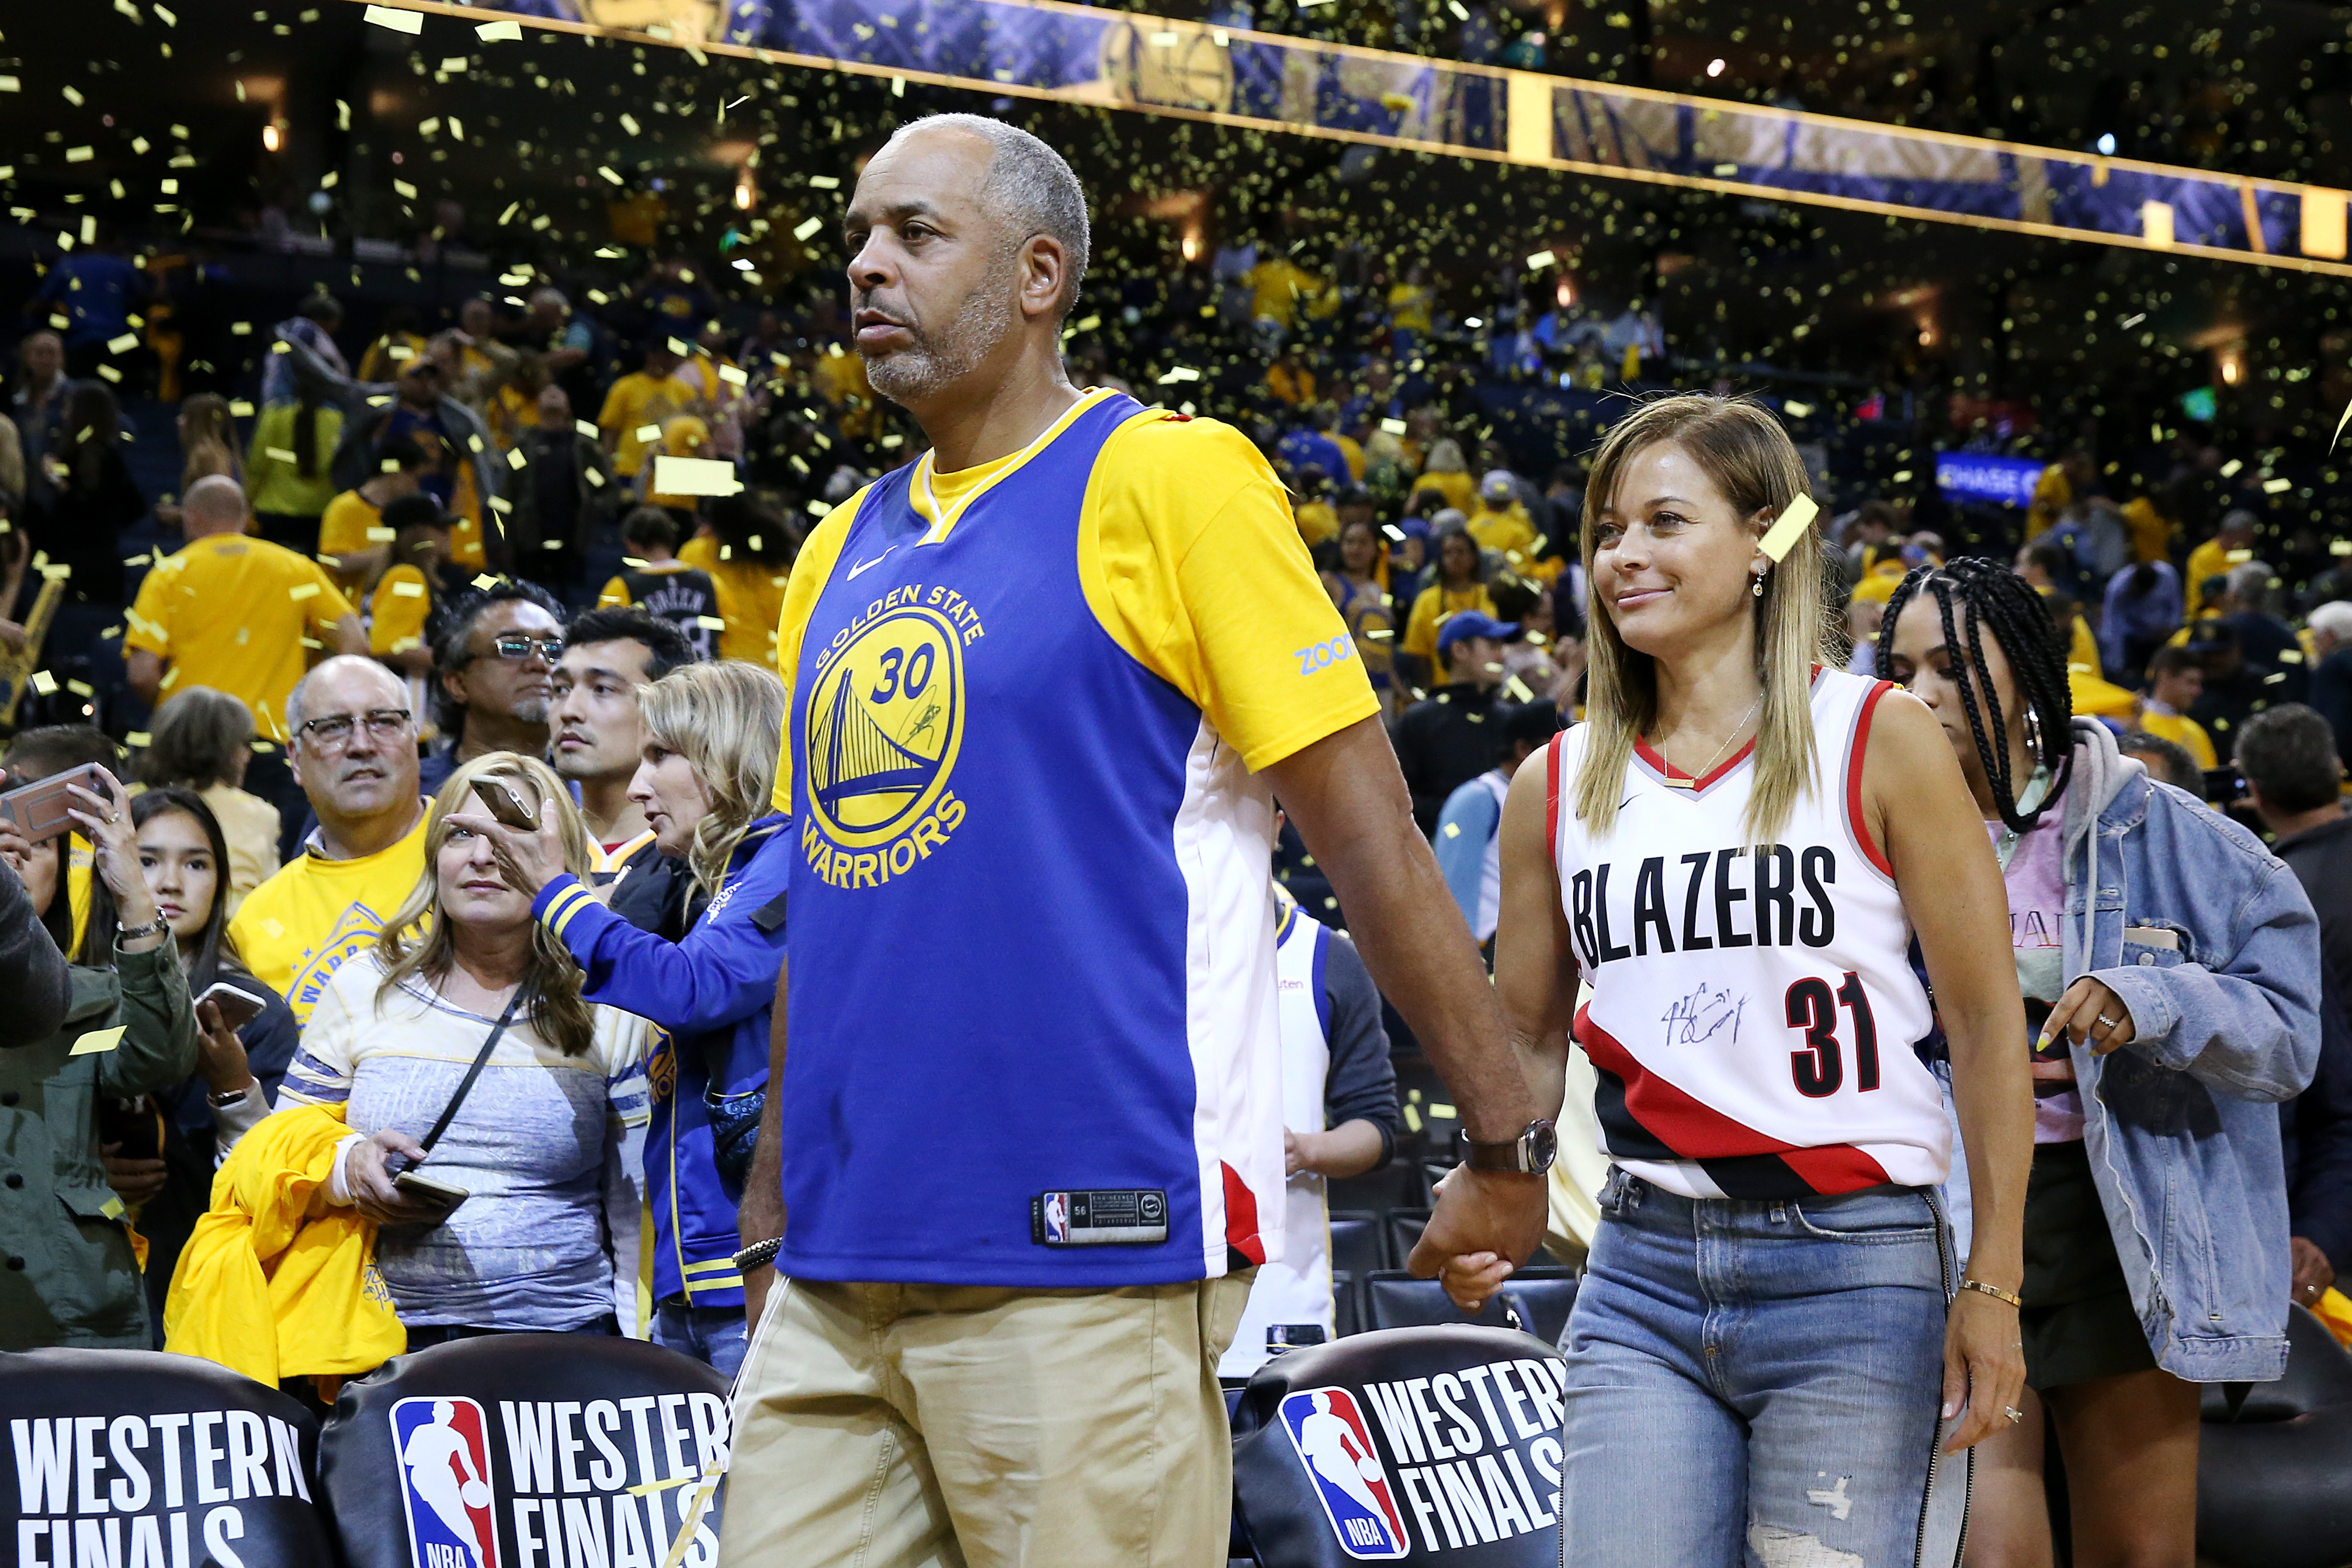 Stephen Curry's mom hits half-court shot at event